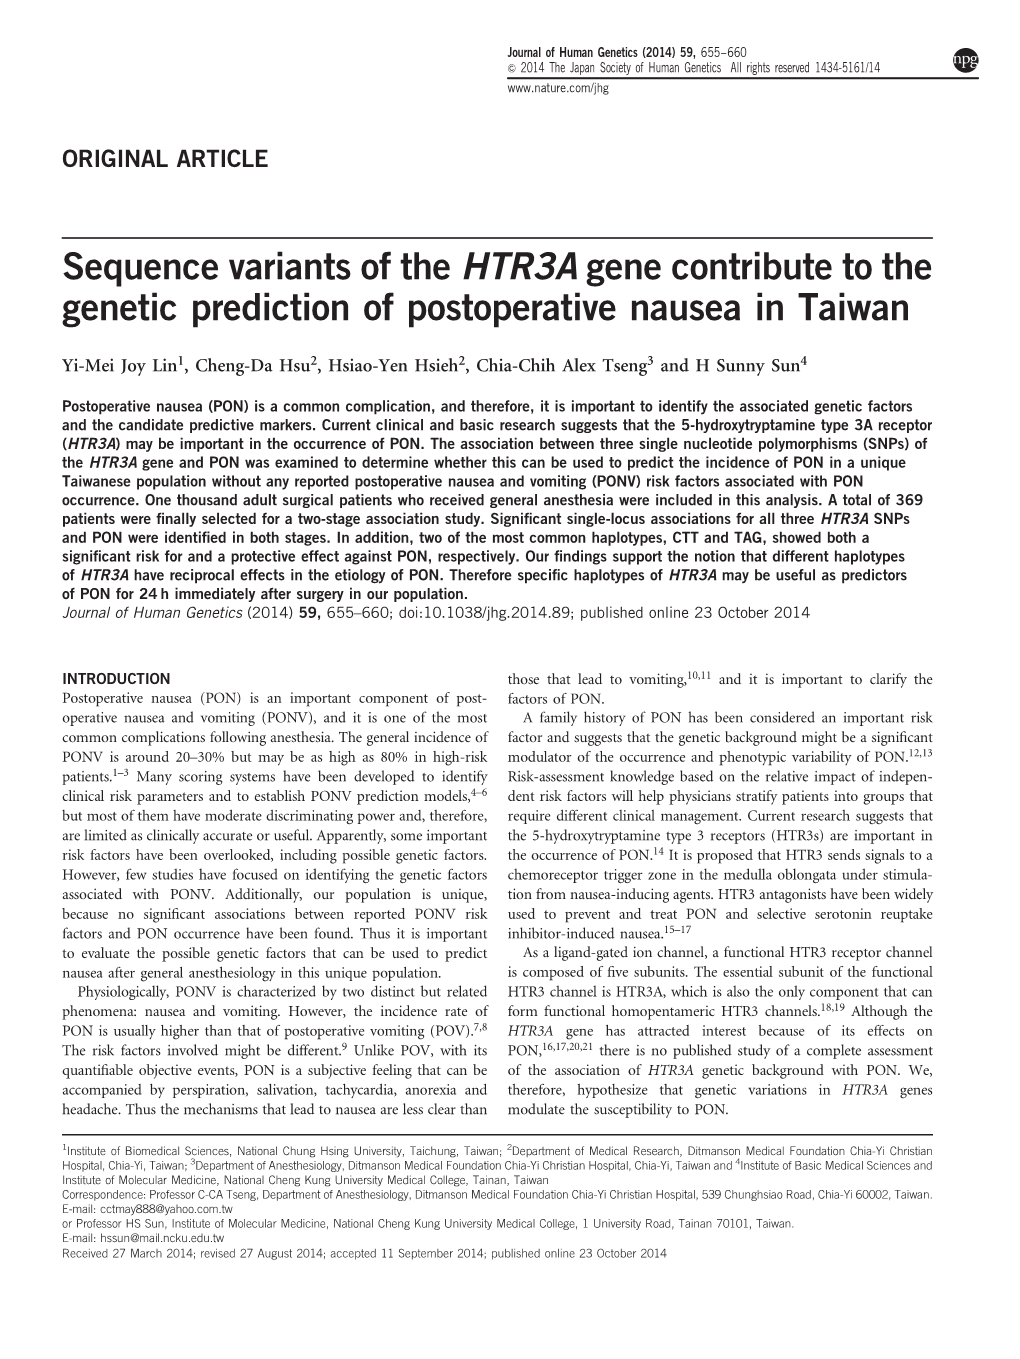 Sequence Variants of the HTR3A Gene Contribute to the Genetic Prediction of Postoperative Nausea in Taiwan